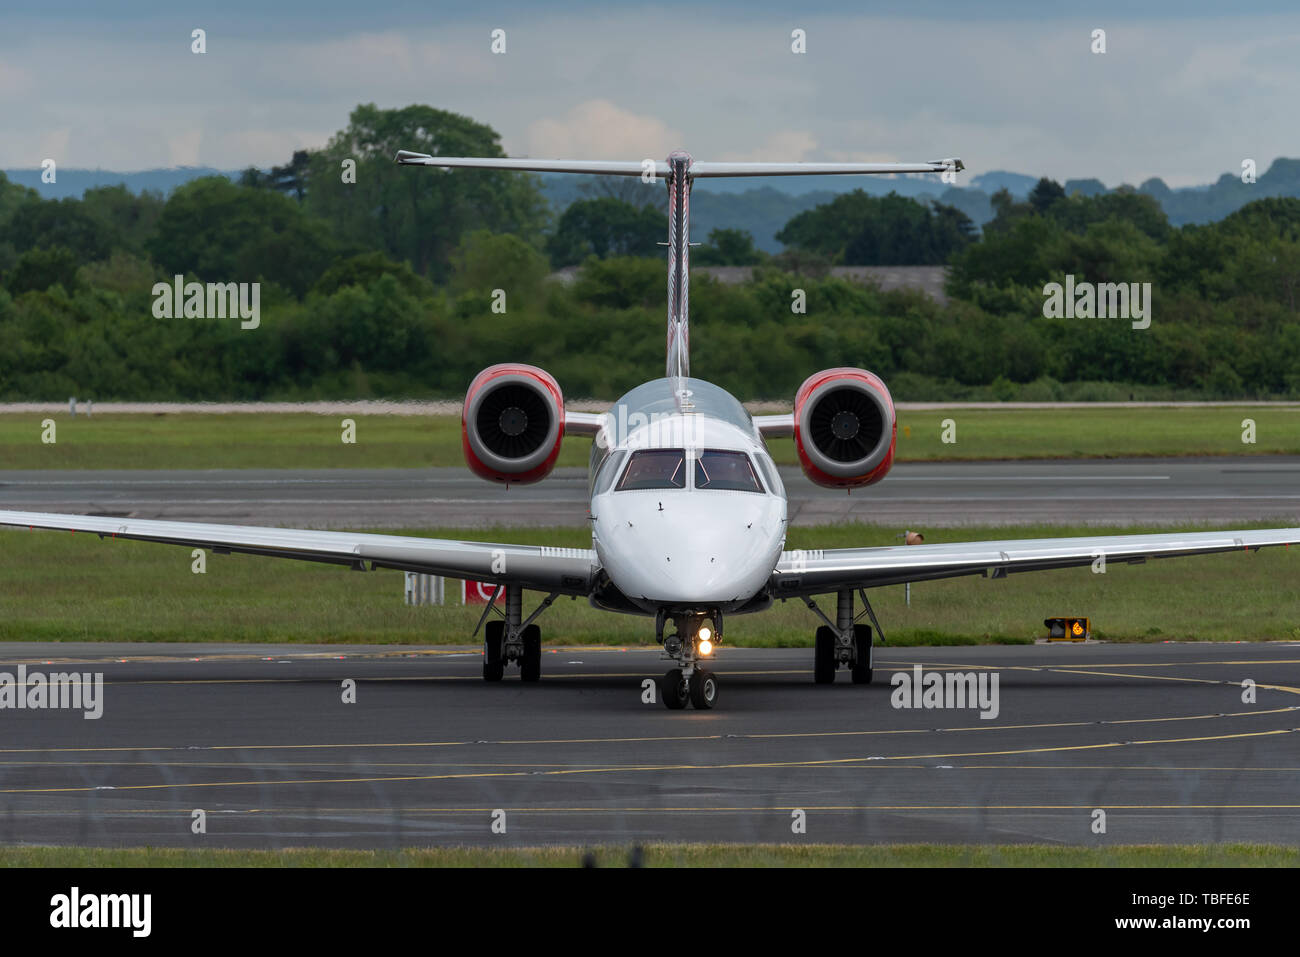 MANCHESTER UK, 30 MAY 2019: Loganair Embraer ERJ-145EP flight LM595 from Inverness turns off Runway 28R at Manchester Airport after landing. Stock Photo